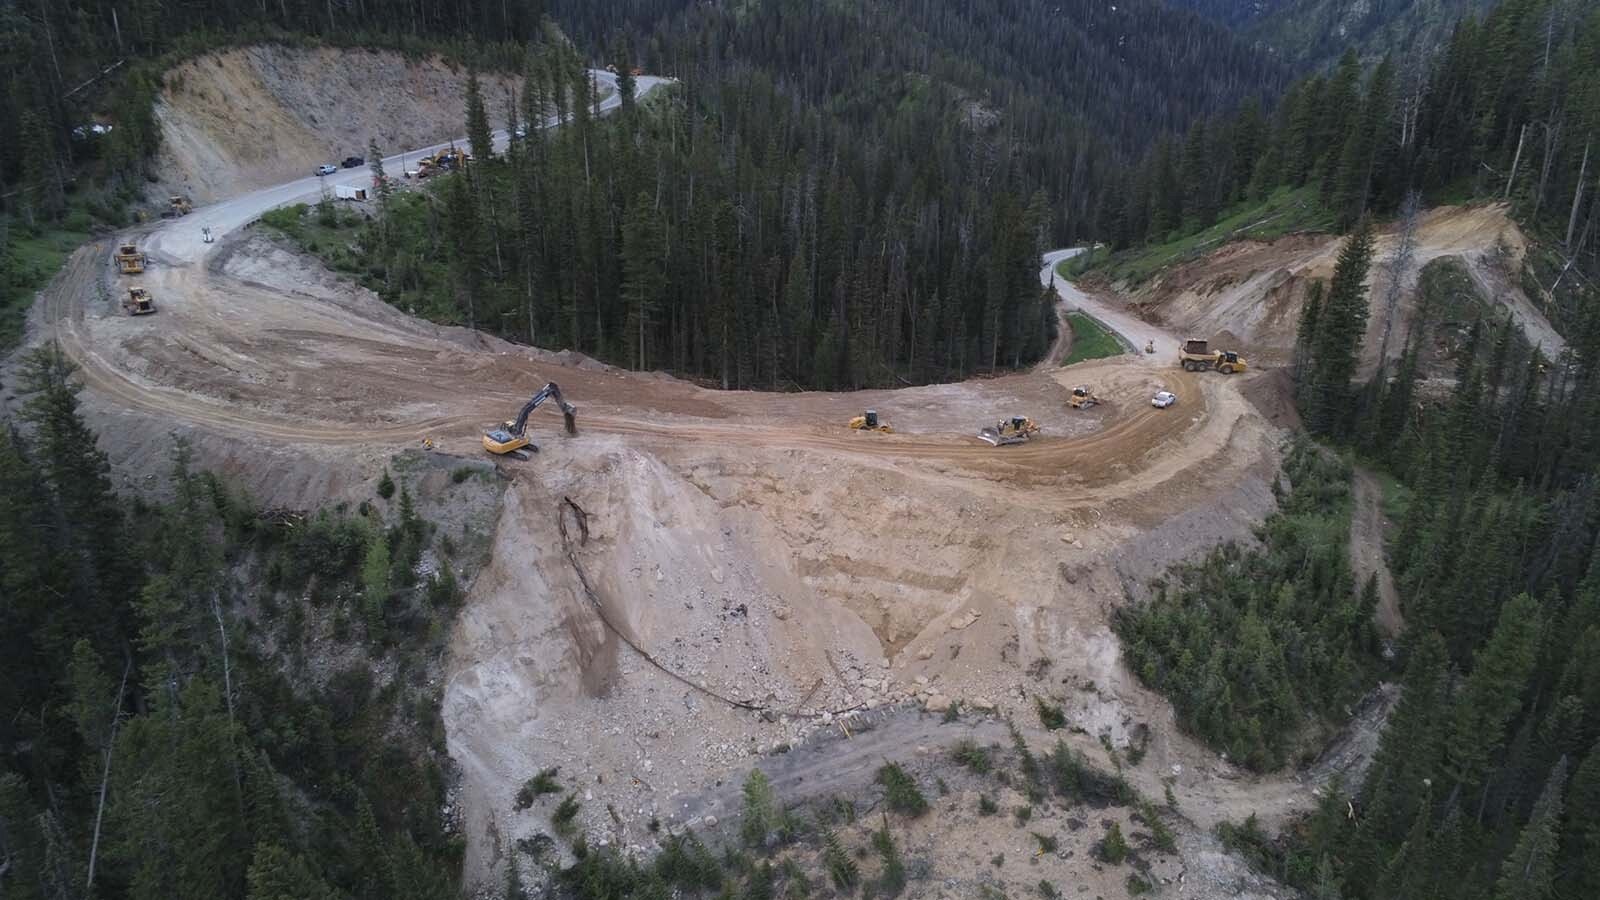 Crews have been working around the clock to repair what WYDOT has called a "catastrophic" failure of Highway 22 over Teton Pass.